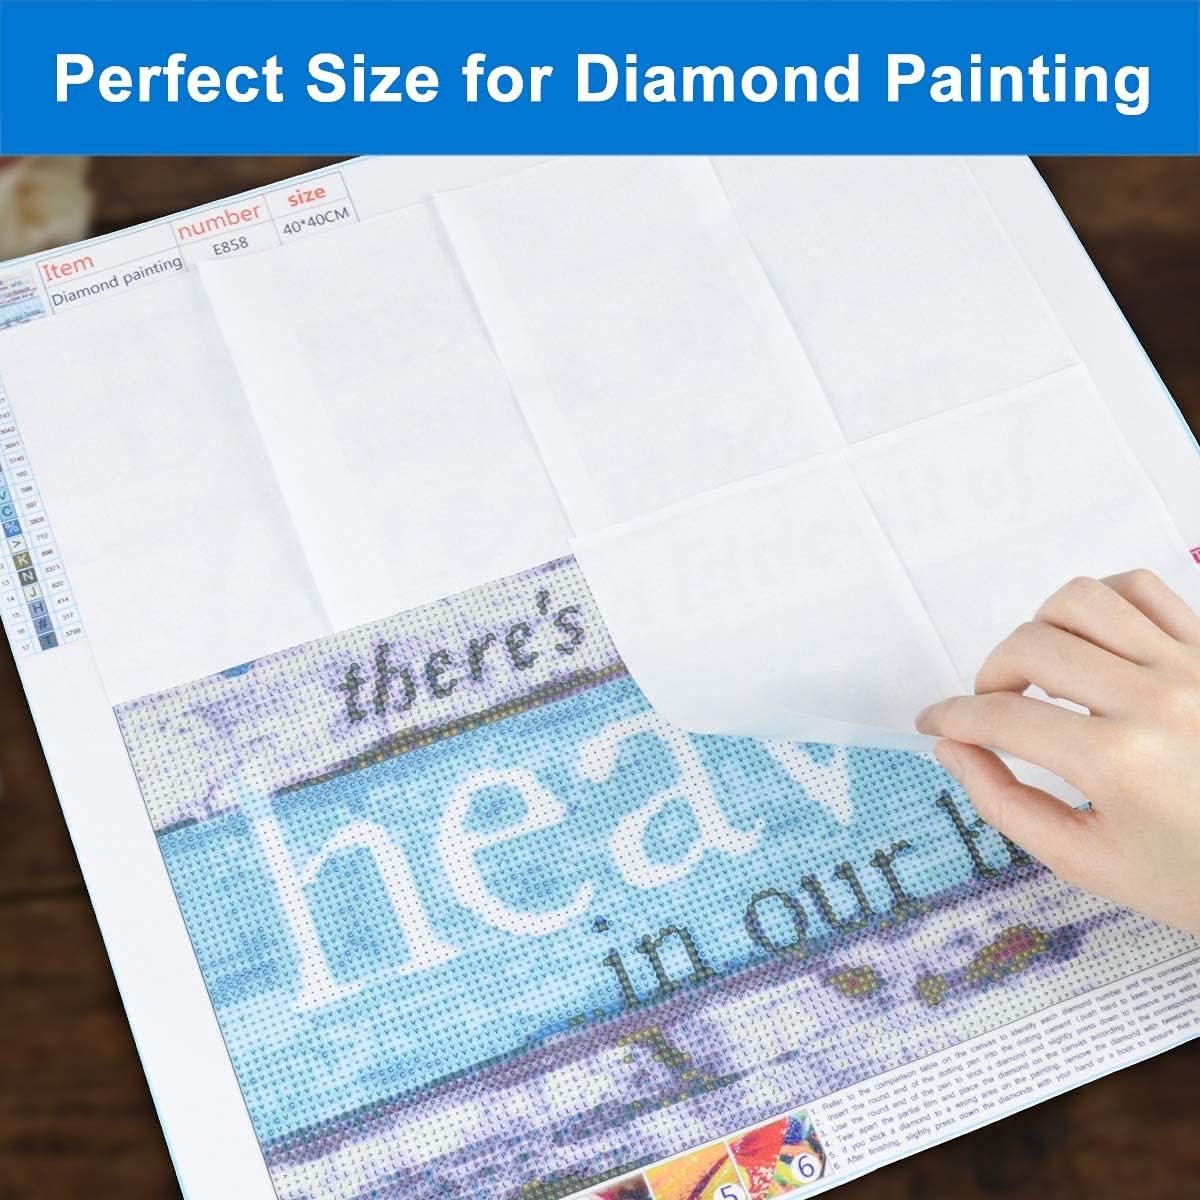 100 Pieces 5D Diamond Painting Release Paper Non-Stick Silicone Release  Paper Double-Sided Diamond Painting Cover Replacement Paper, 5.9 x 3.9  inch/15 x 10 cm